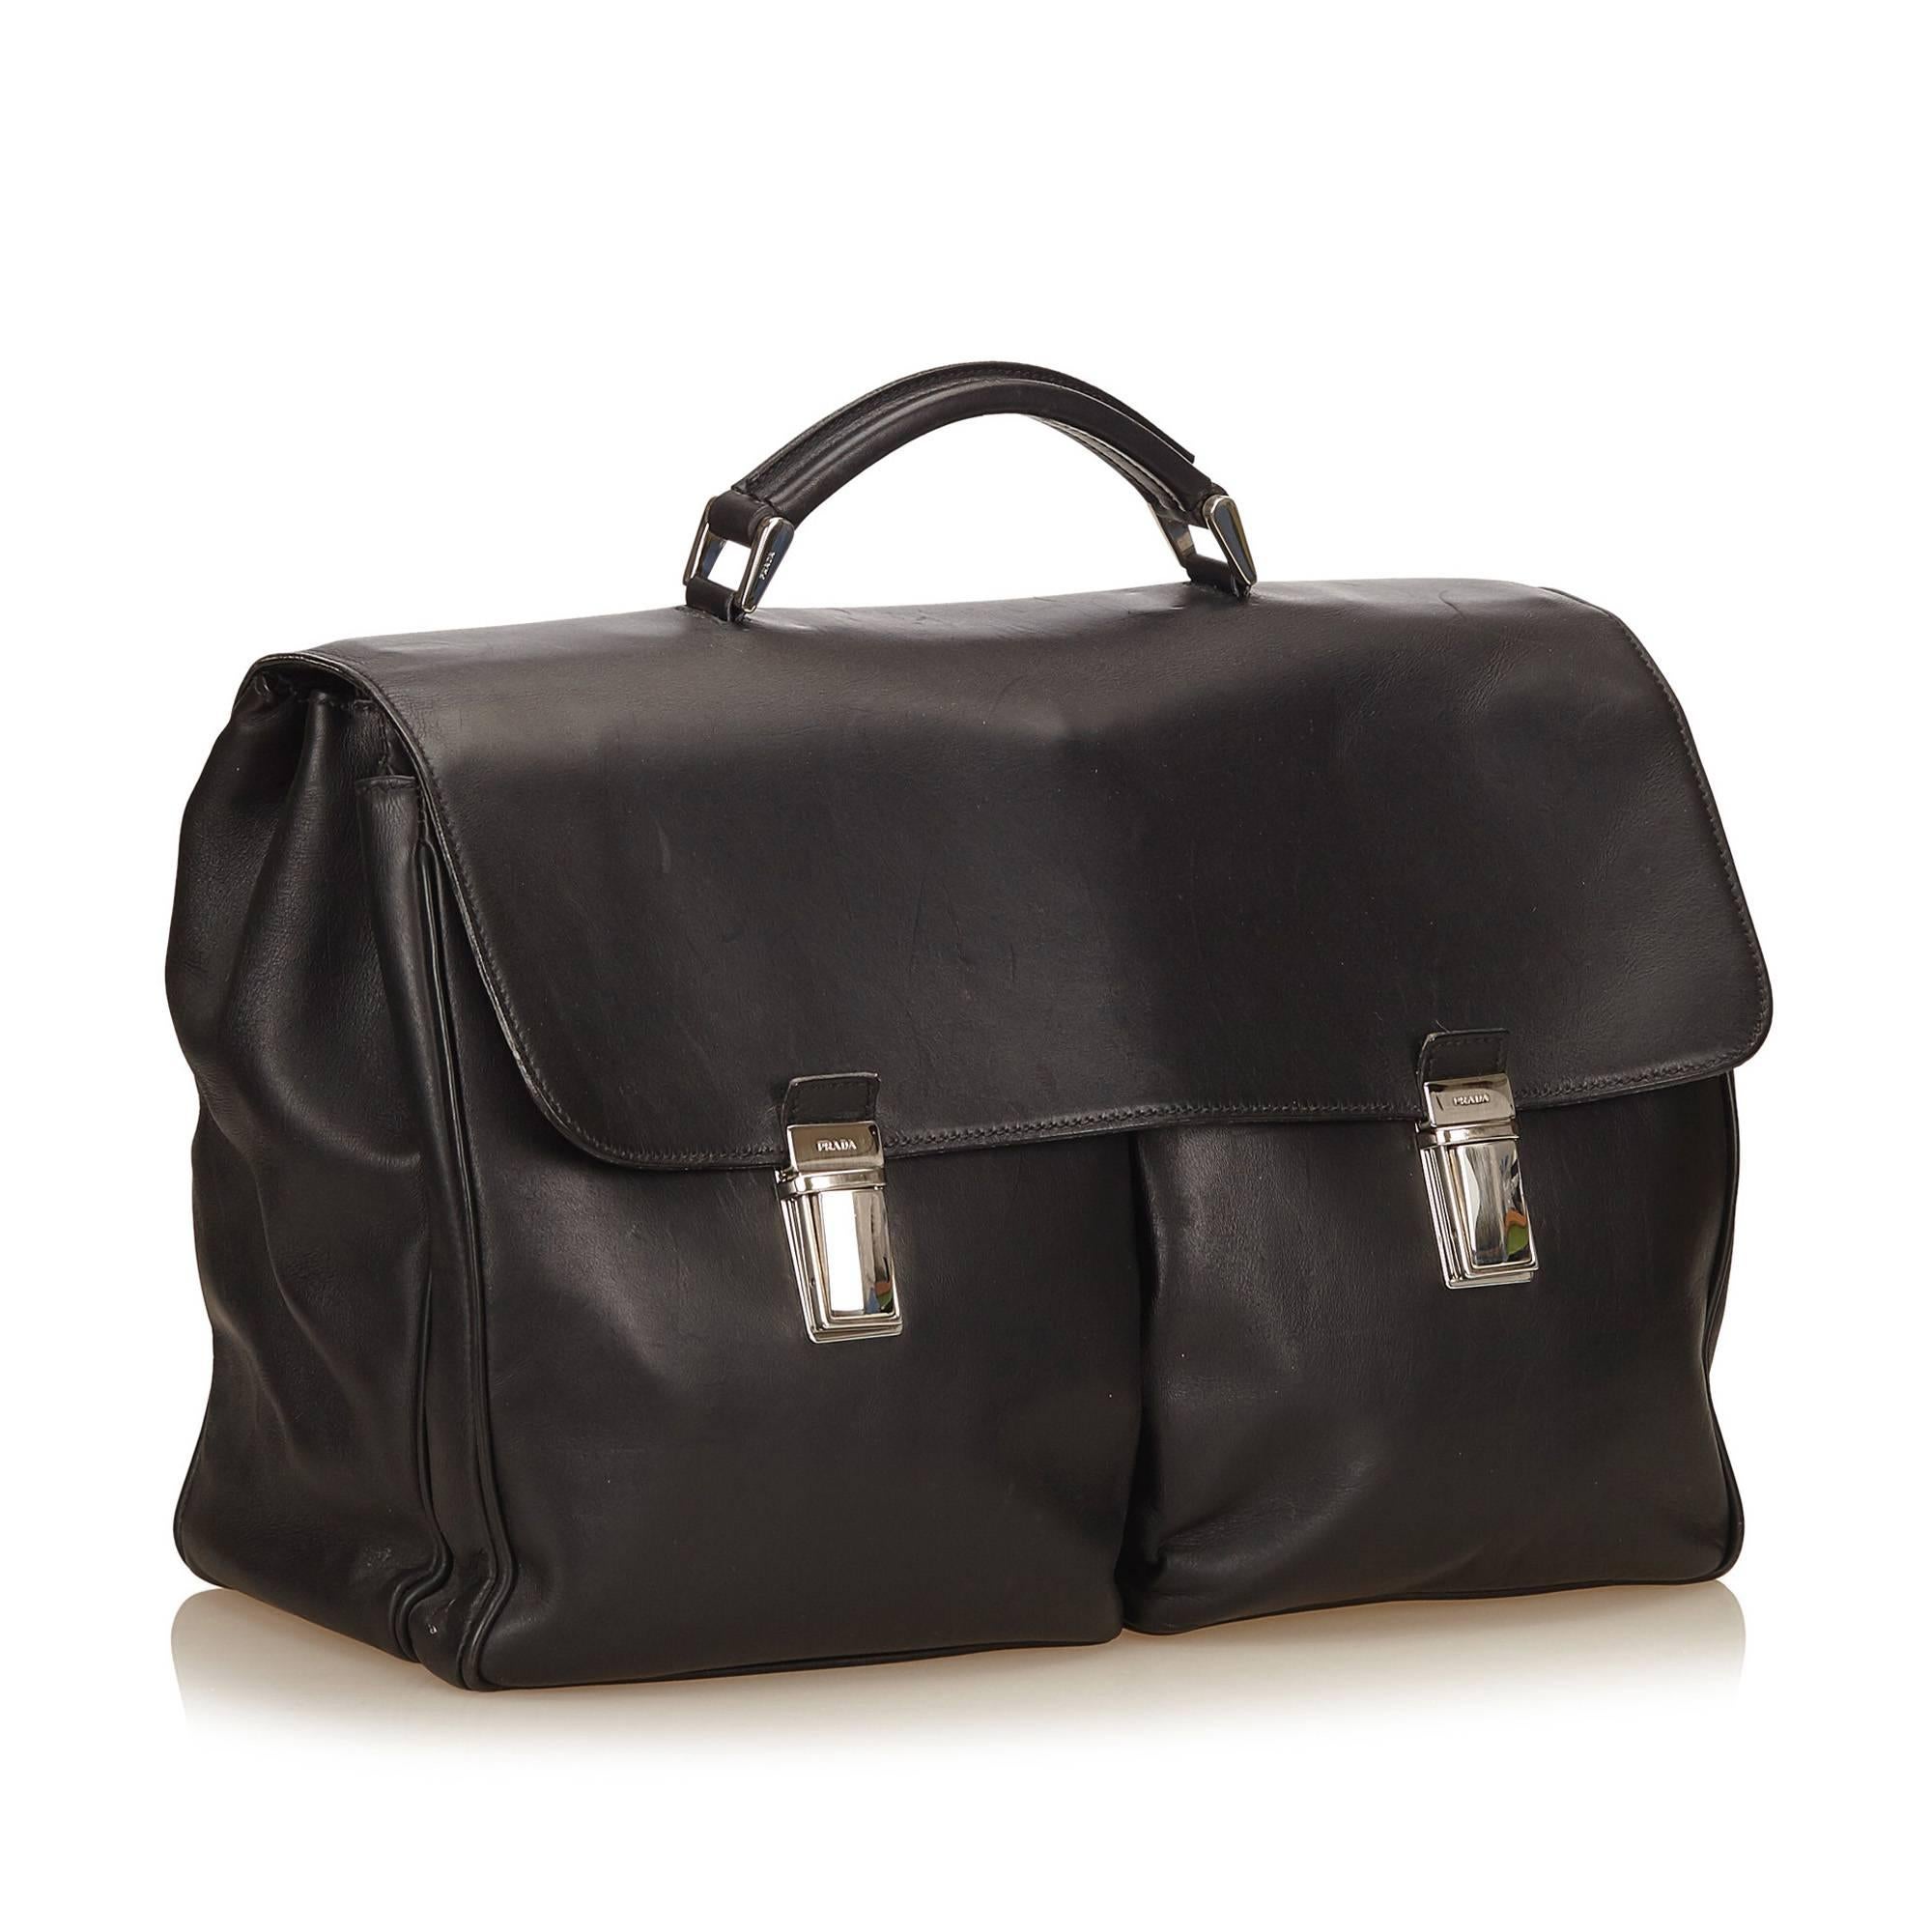 This briefcase features a leather body, exterior back zip pocket, leather handle, front flap with push lock closures, and interior open and zip pockets. 

It carries a B+ condition rating.

Dimensions: 
Length 43 cm
Width 29 cm
Depth 15 cm
Drop 6